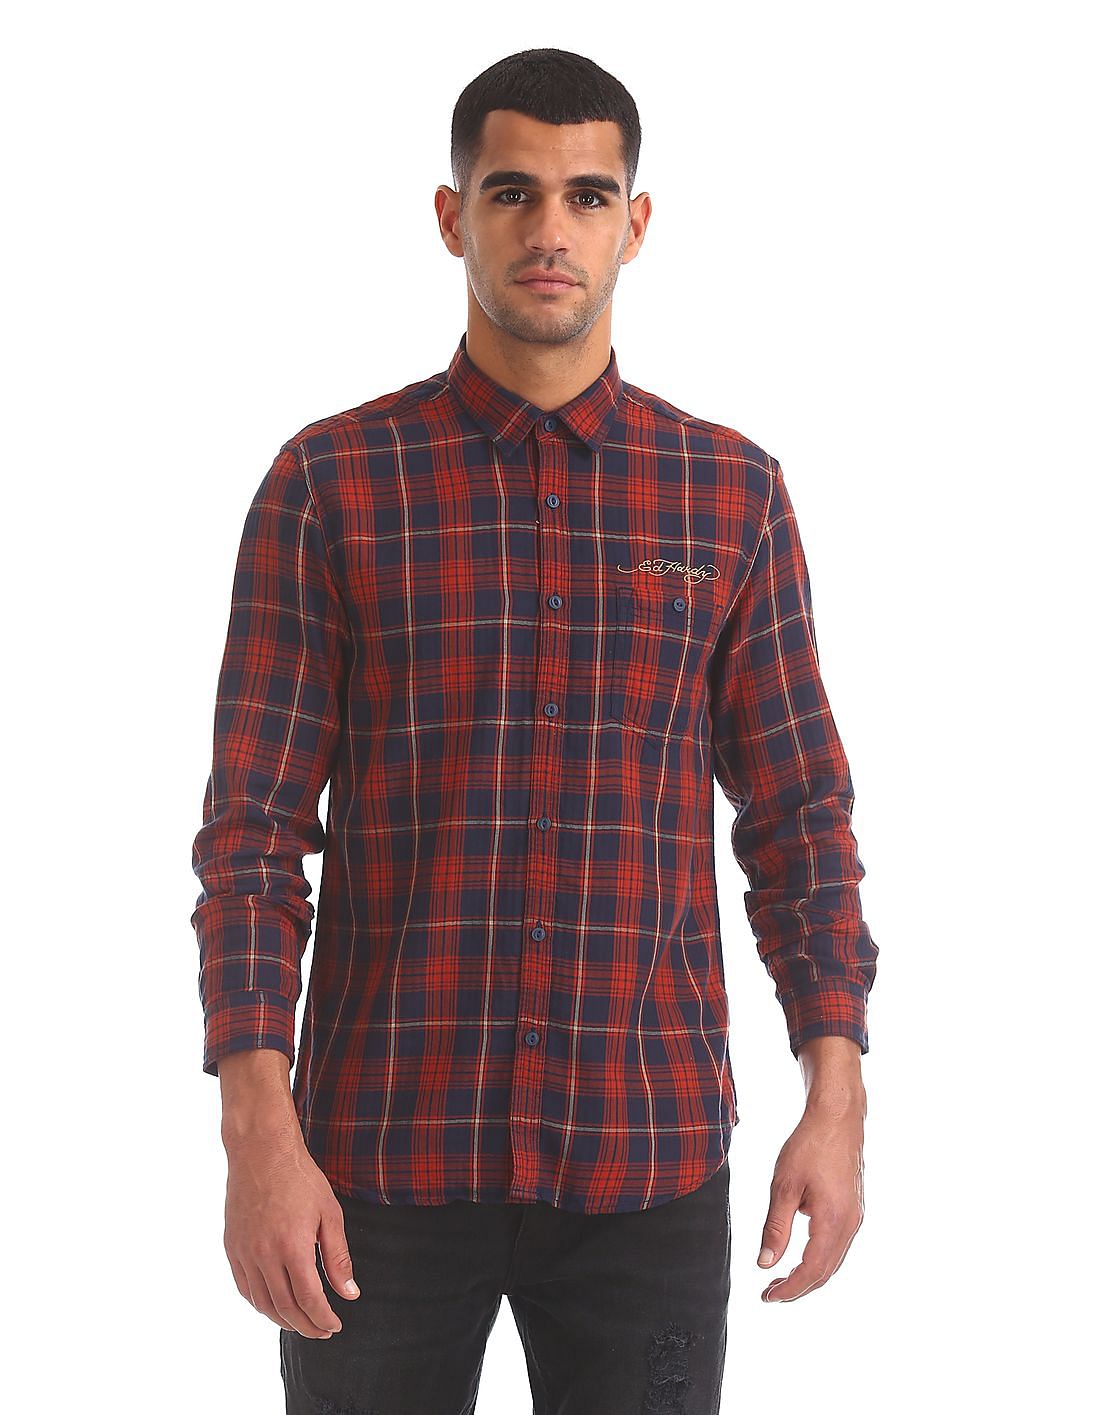 60% Off on Men’s Clothing